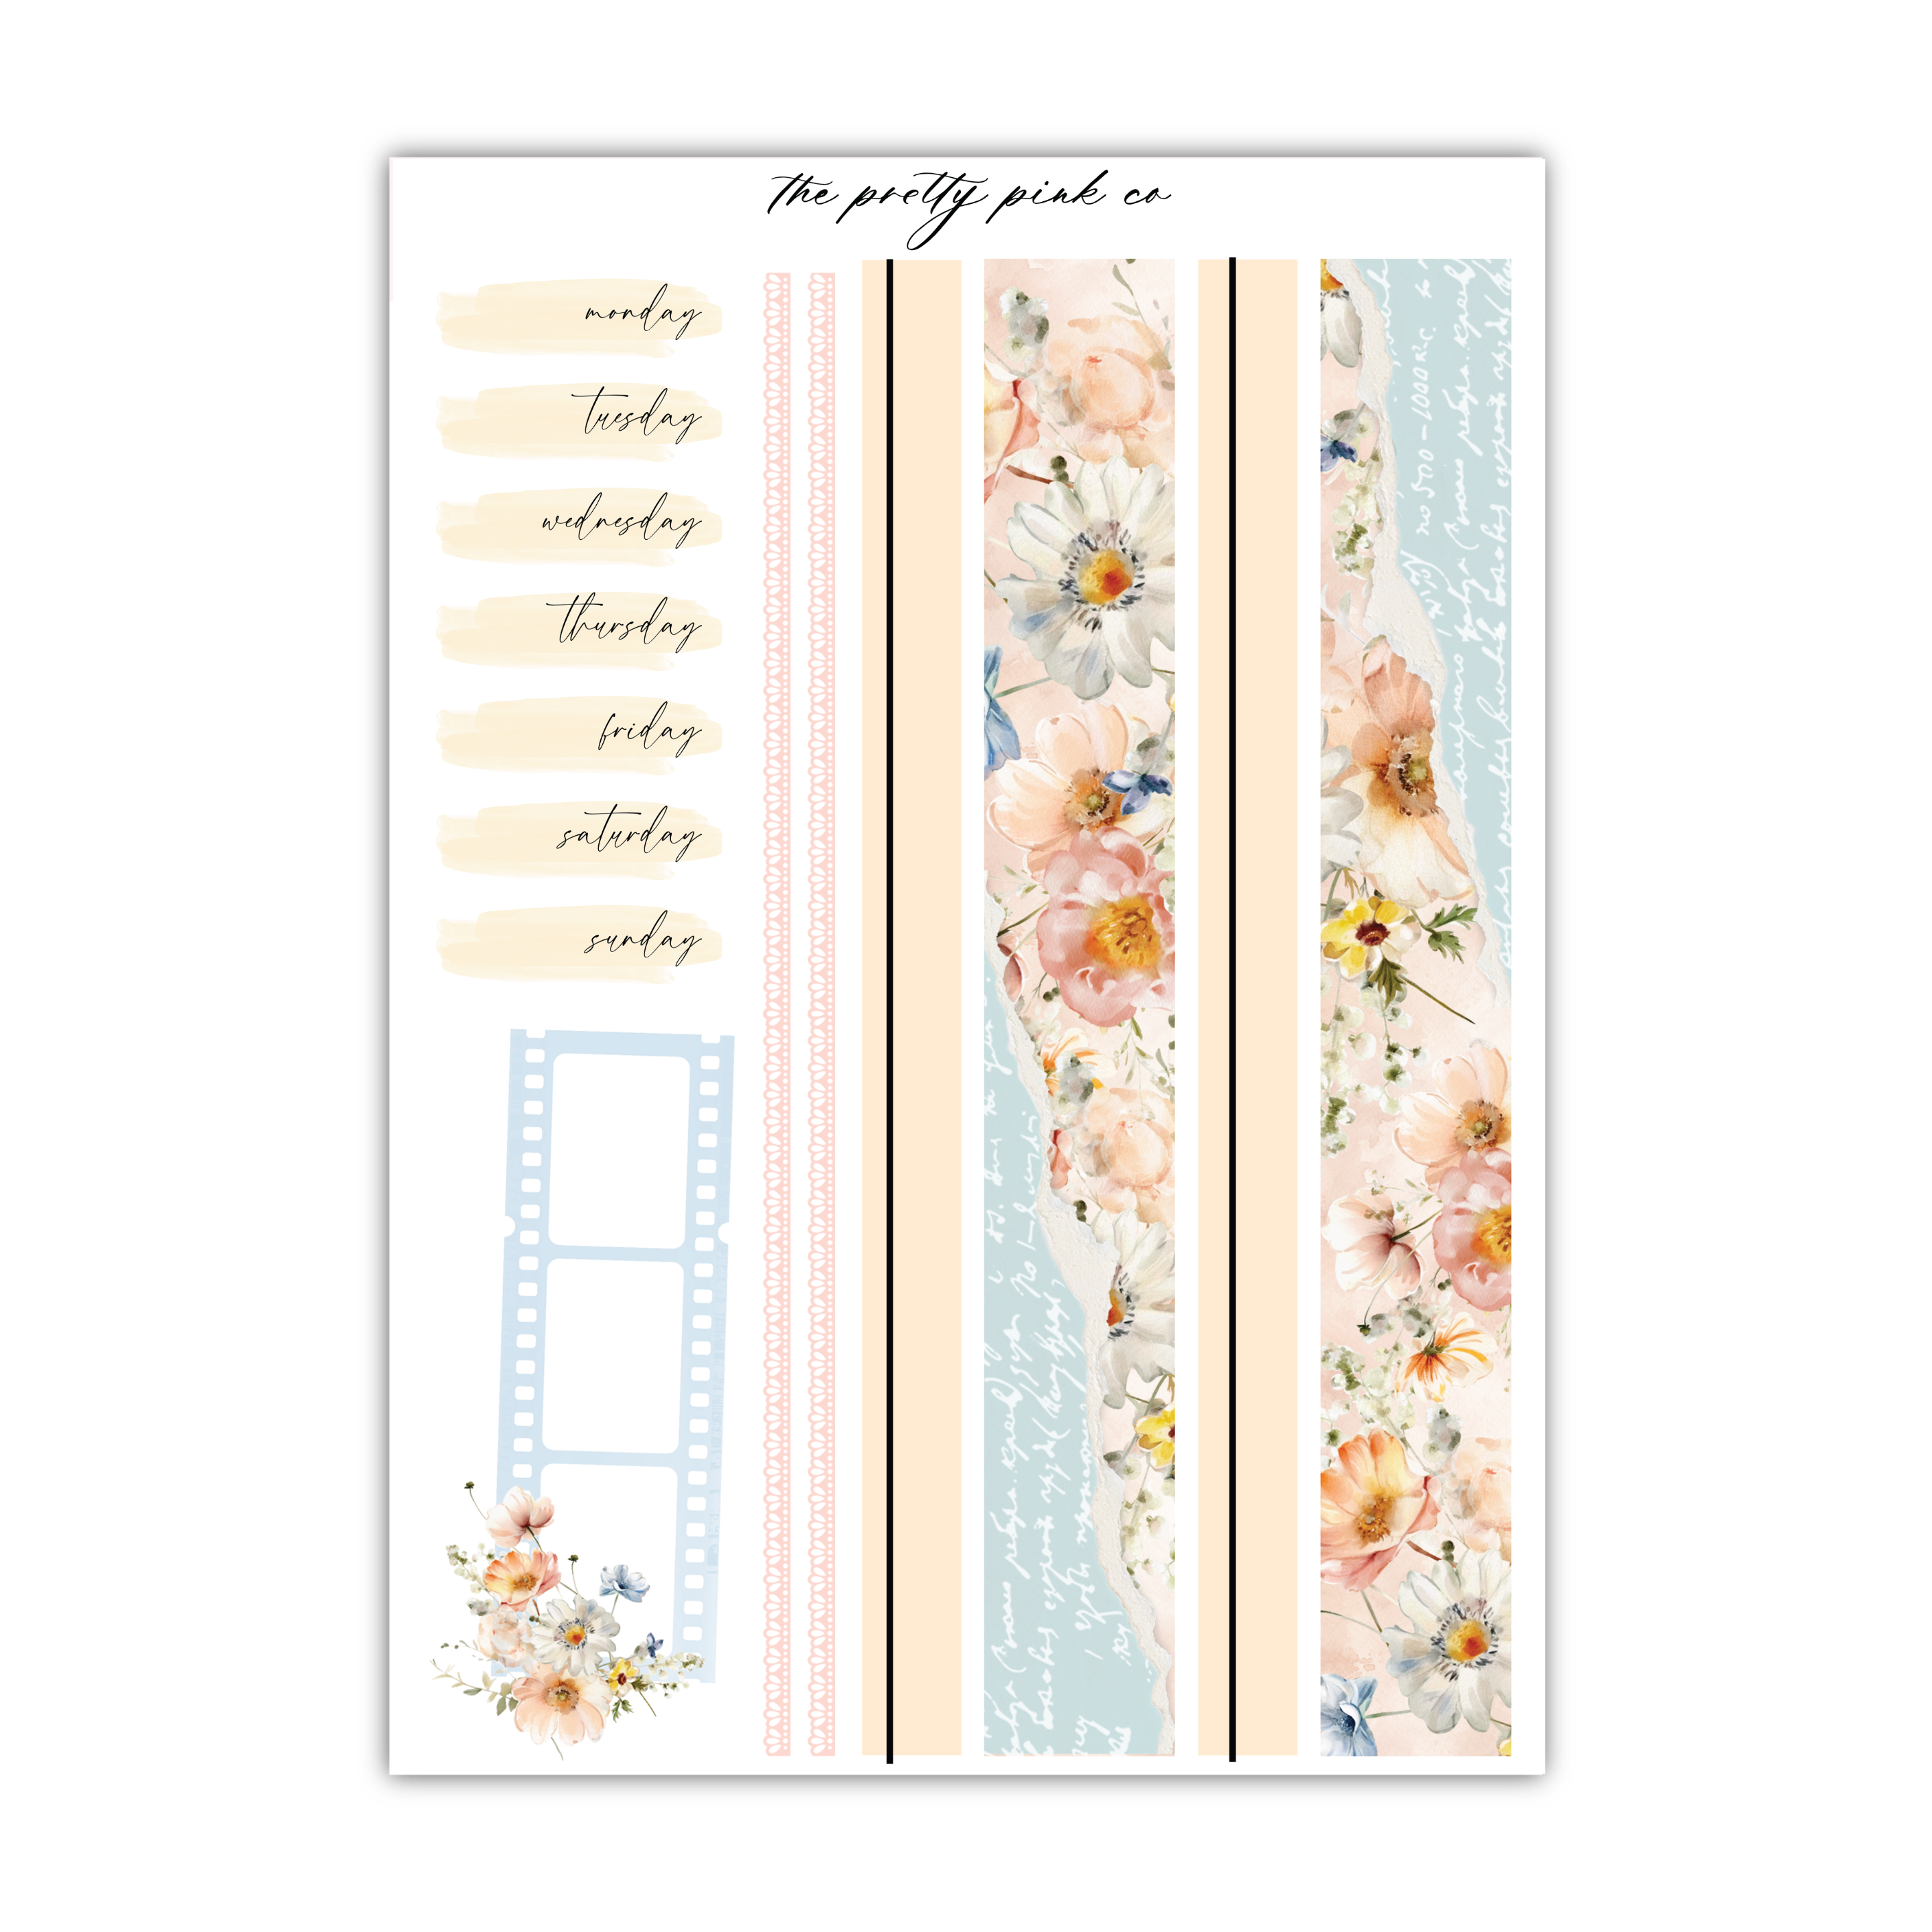 a bookmark with flowers and film strips